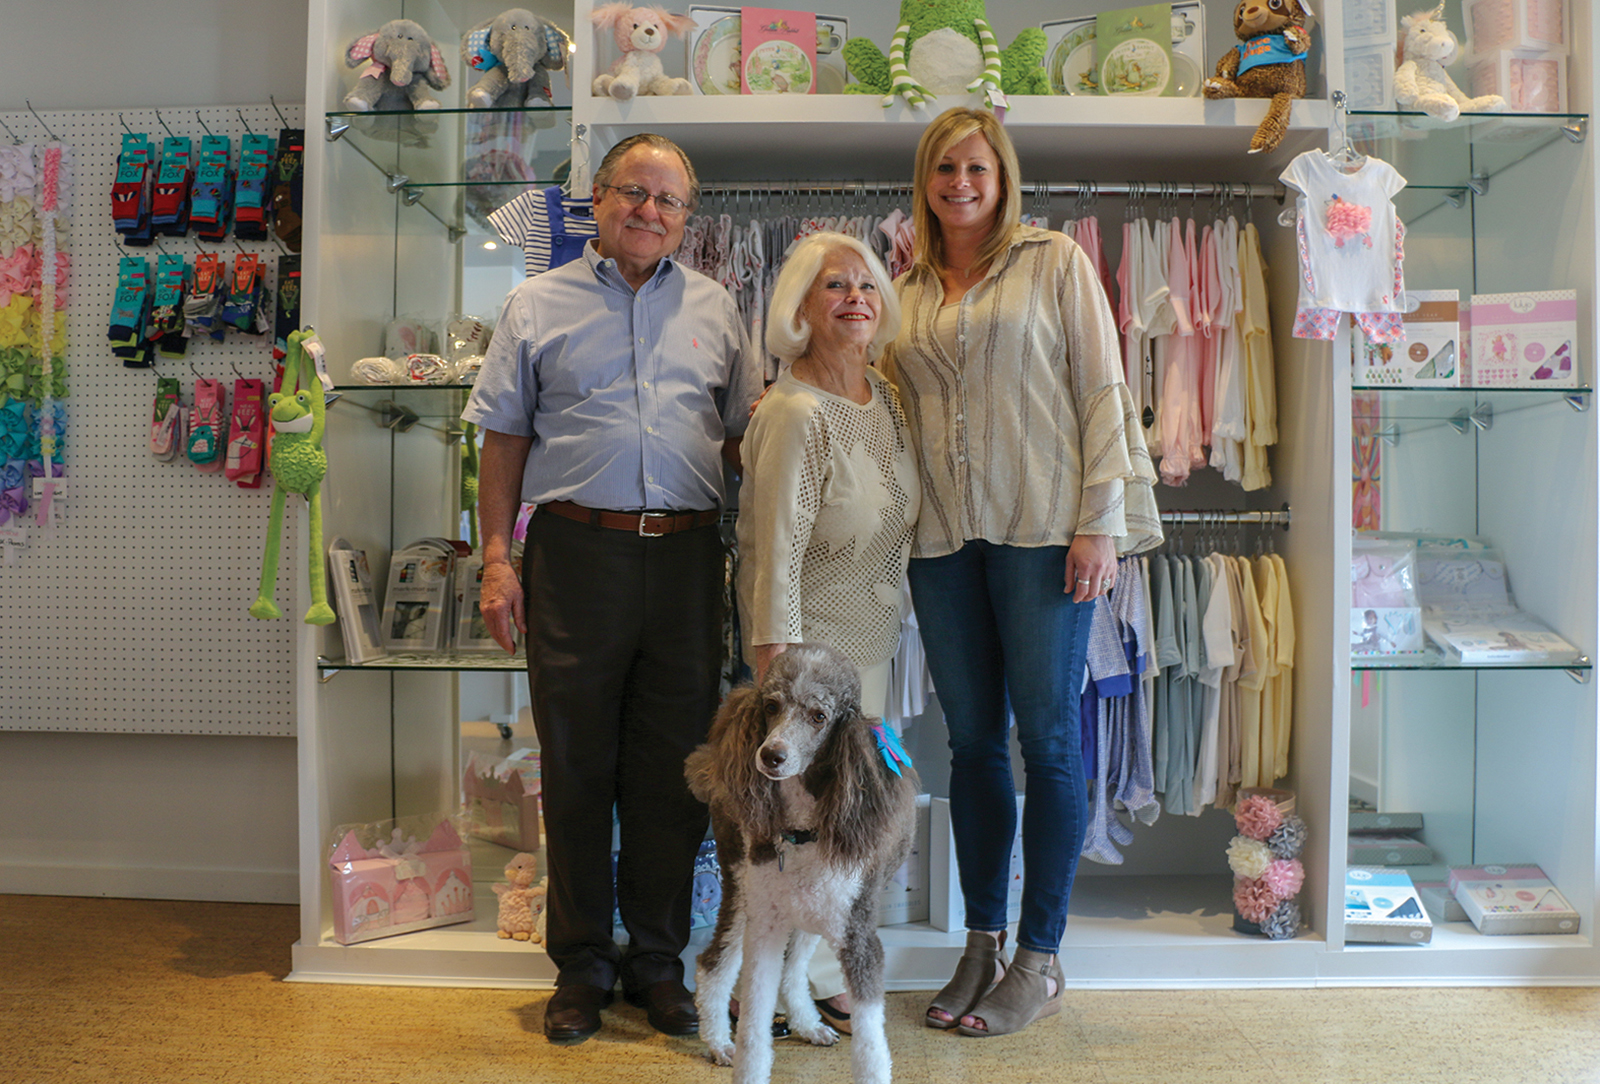 Left to Right: Owners Tom and Sharon James, Kate Nielsen, manager and Marni of S'mores Kidz Klothes of Highlands NC